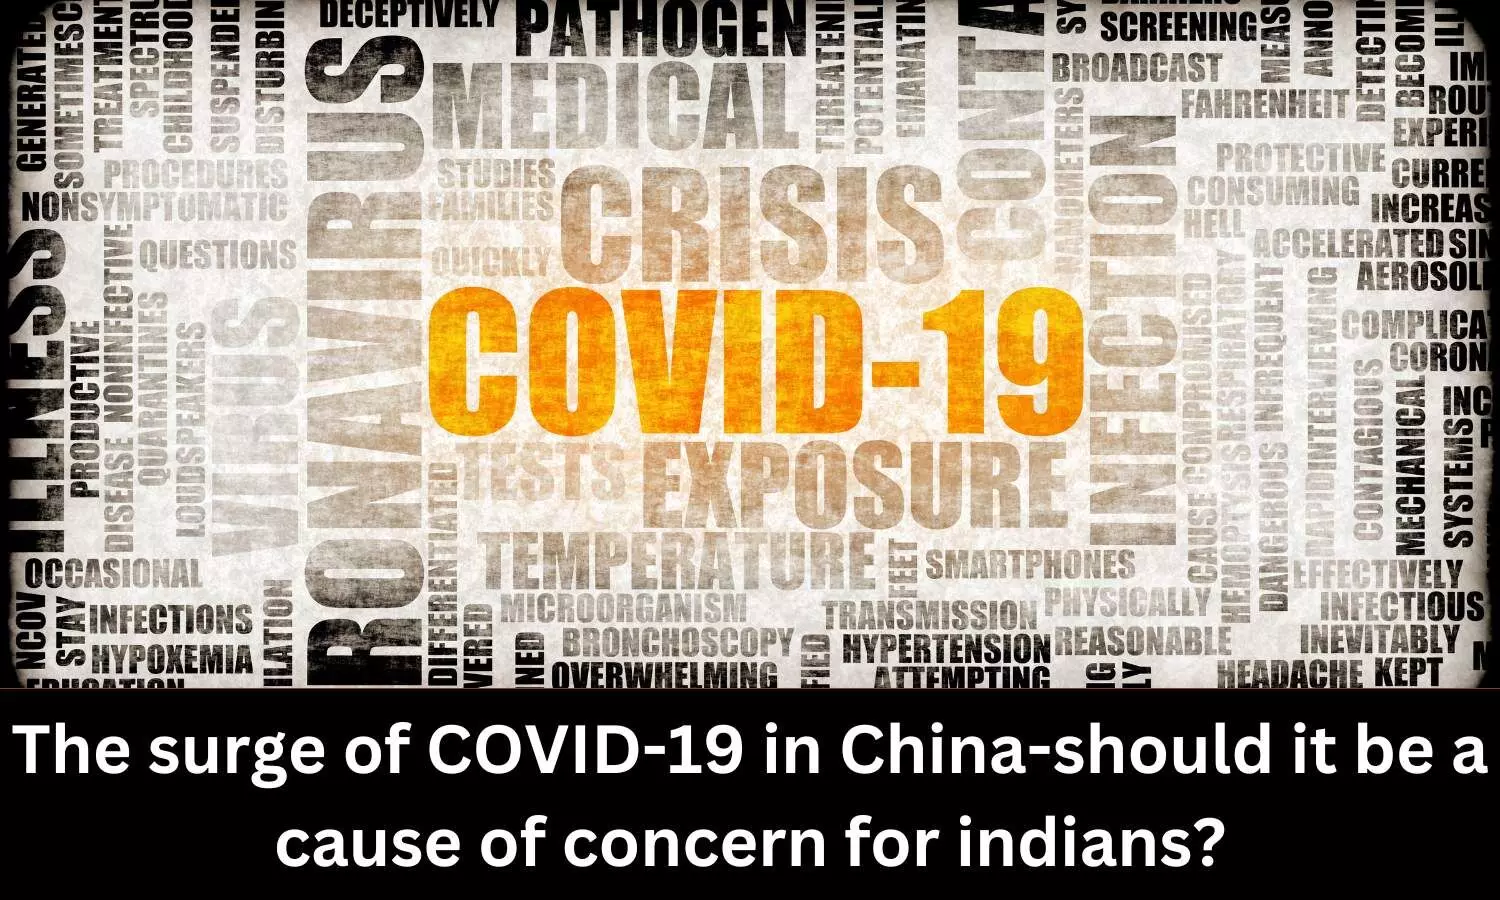 The surge of COVID-19 in China-should it be a cause of concern for indians?